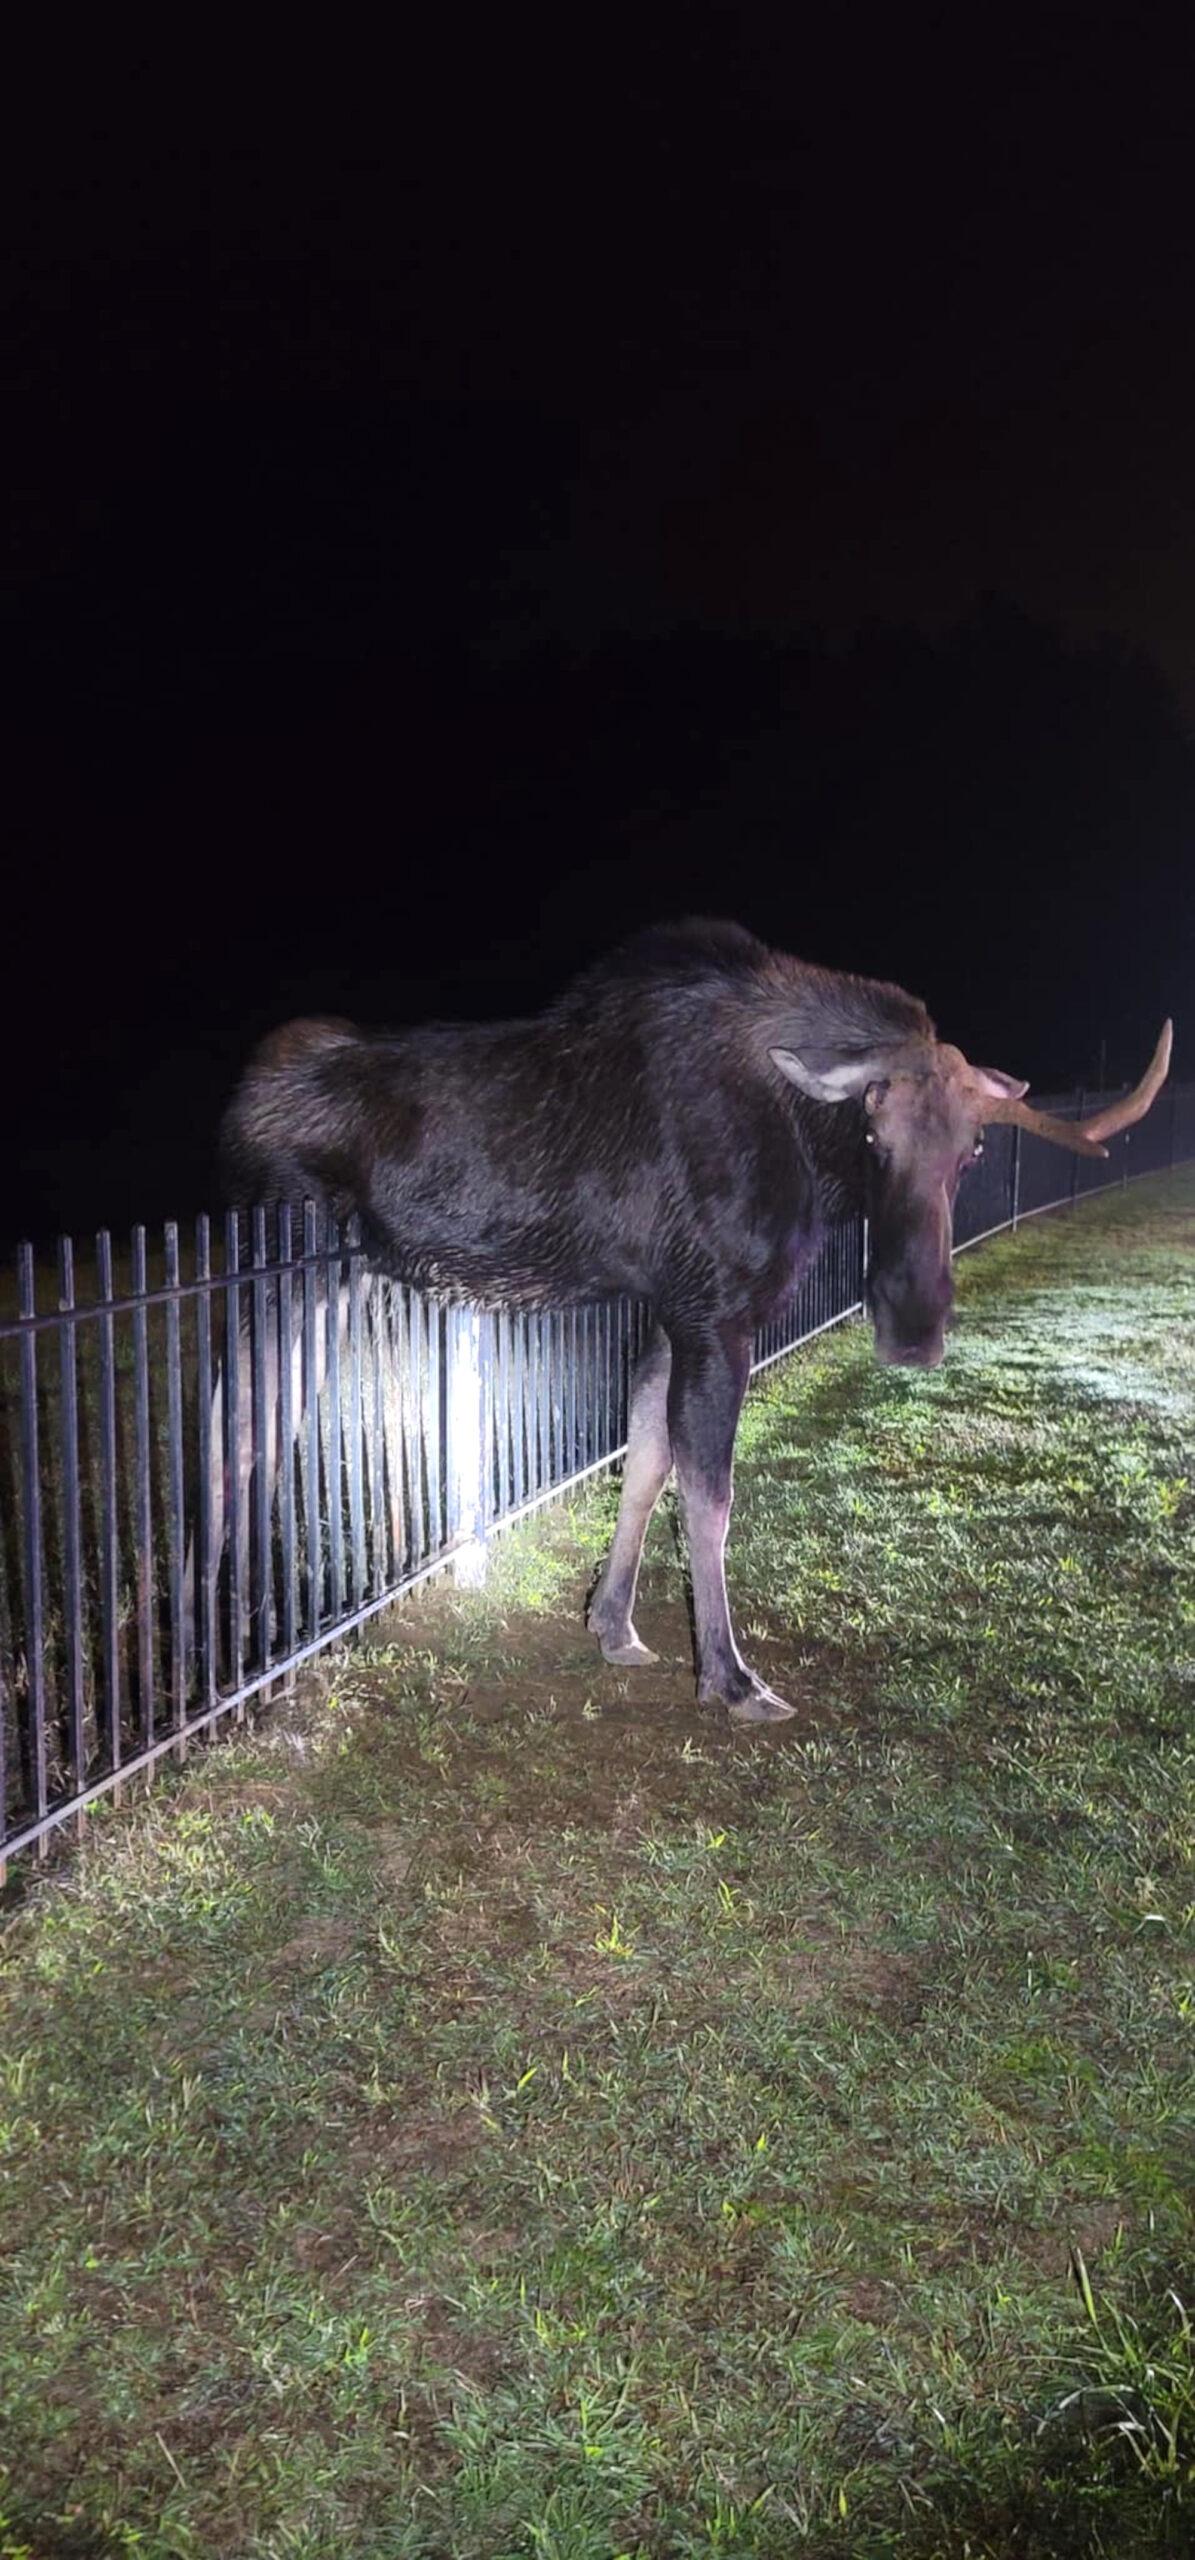 Read more about the article LOOSE MOOSE: Feisty Critter With One Antler Rescued By Firefighters In Connecticut